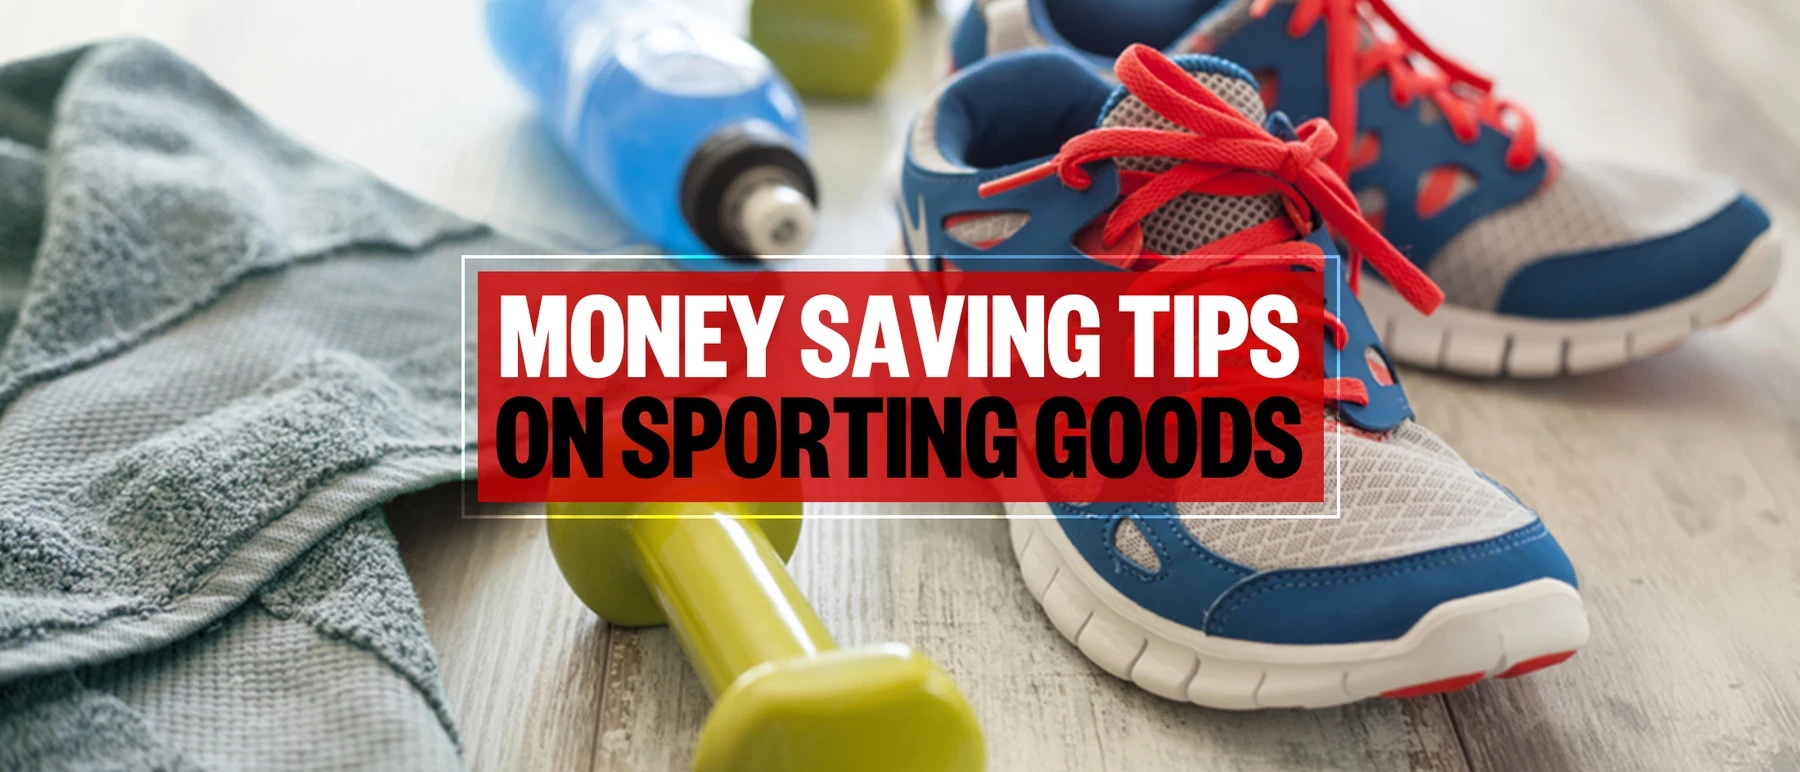 Top 10 brands for cheap gym clothes and other verified tips